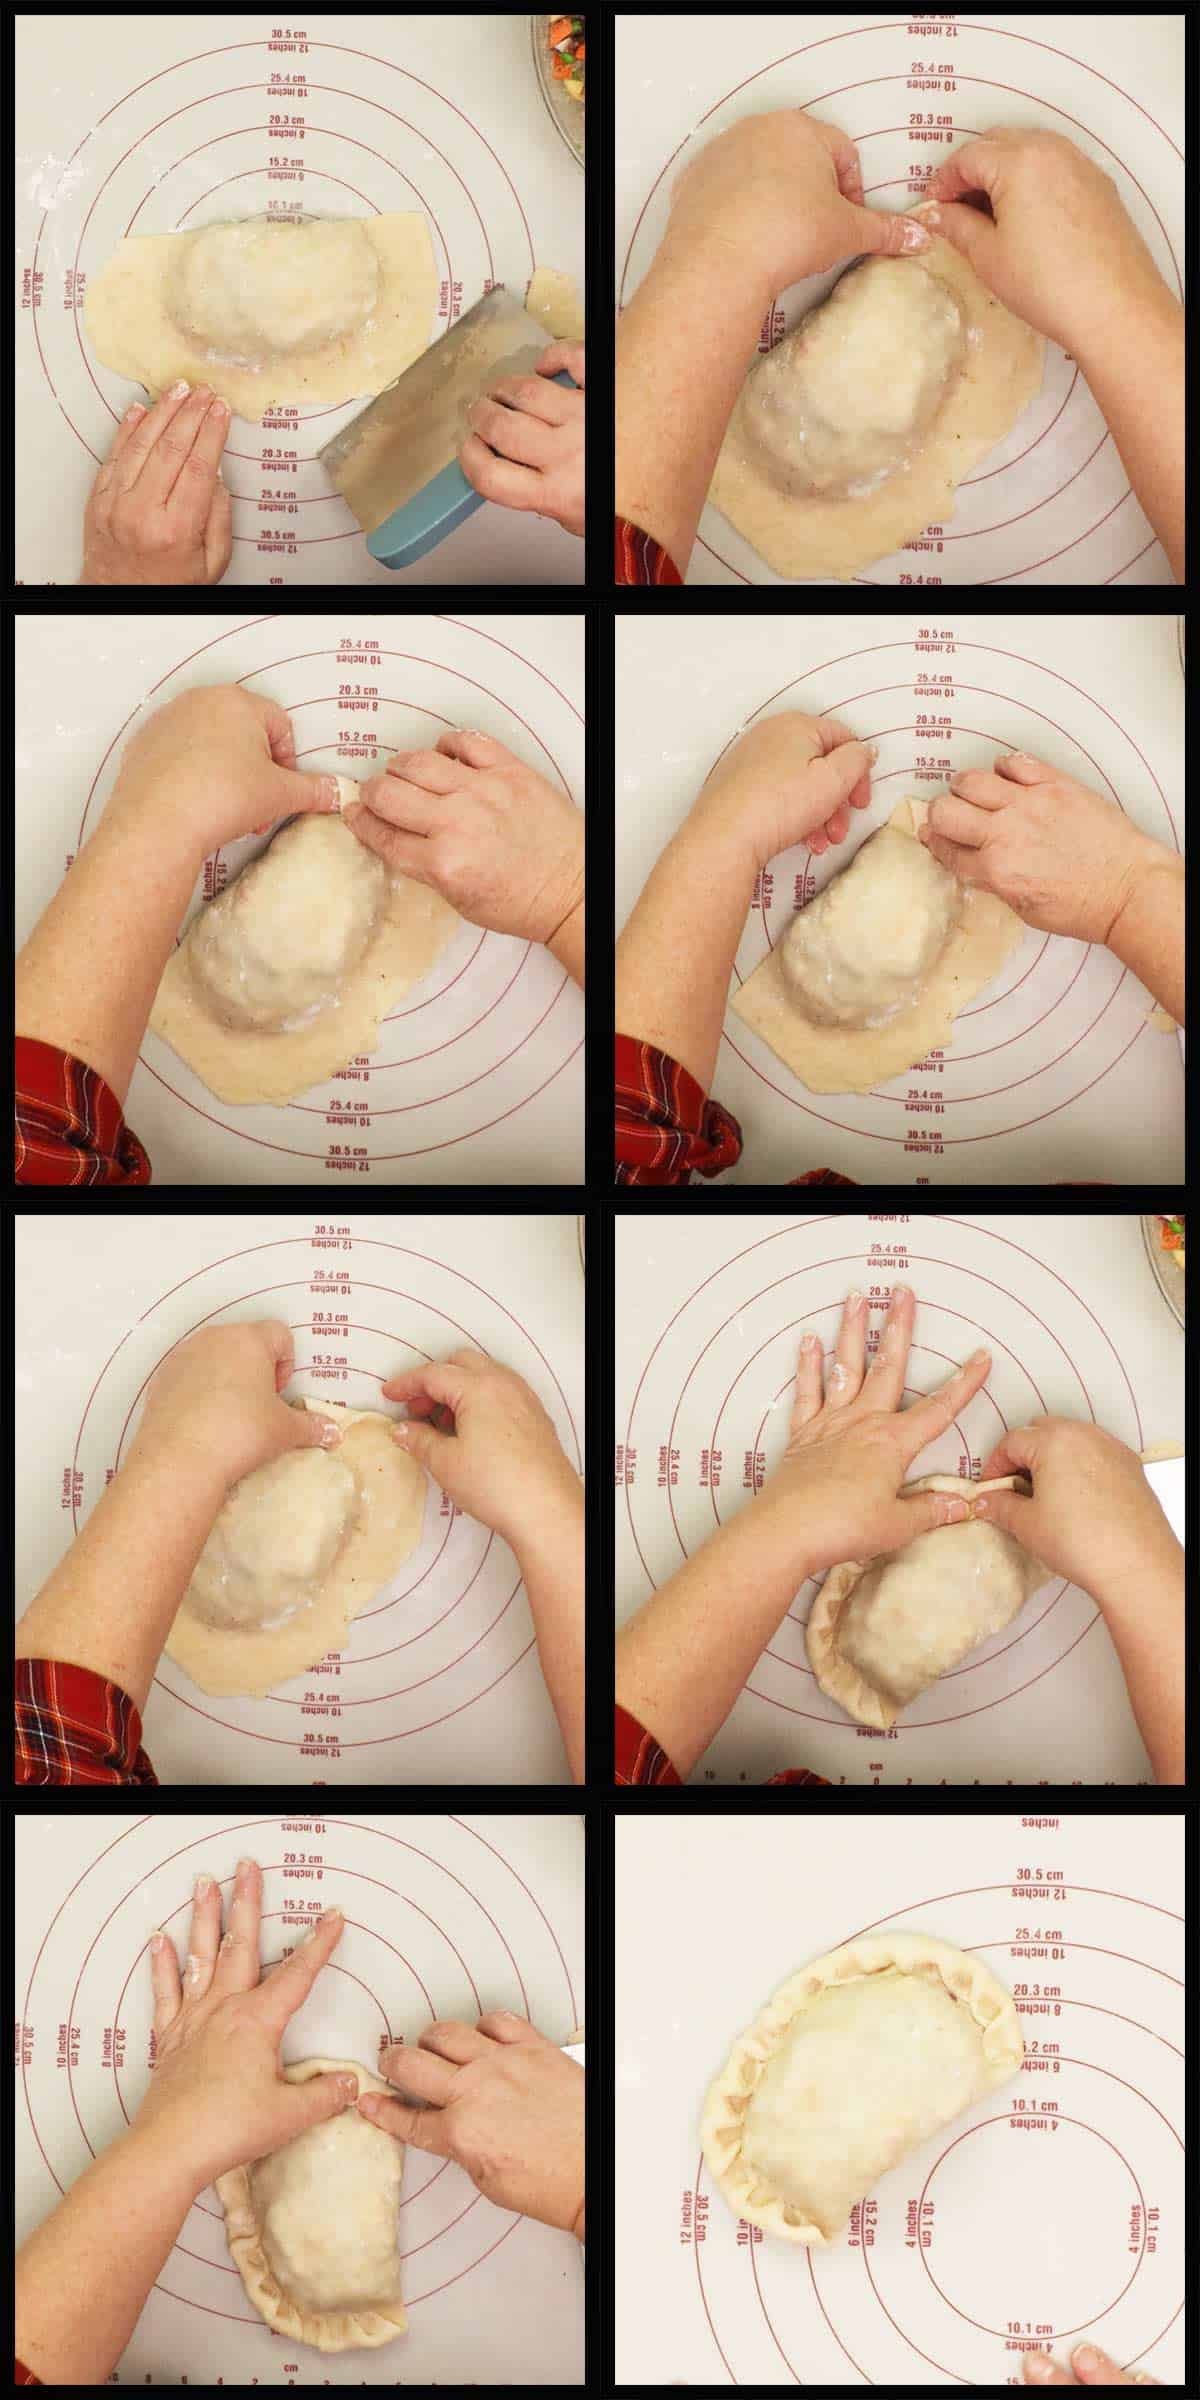 Crimping the edges of the savory hand pies before baking.